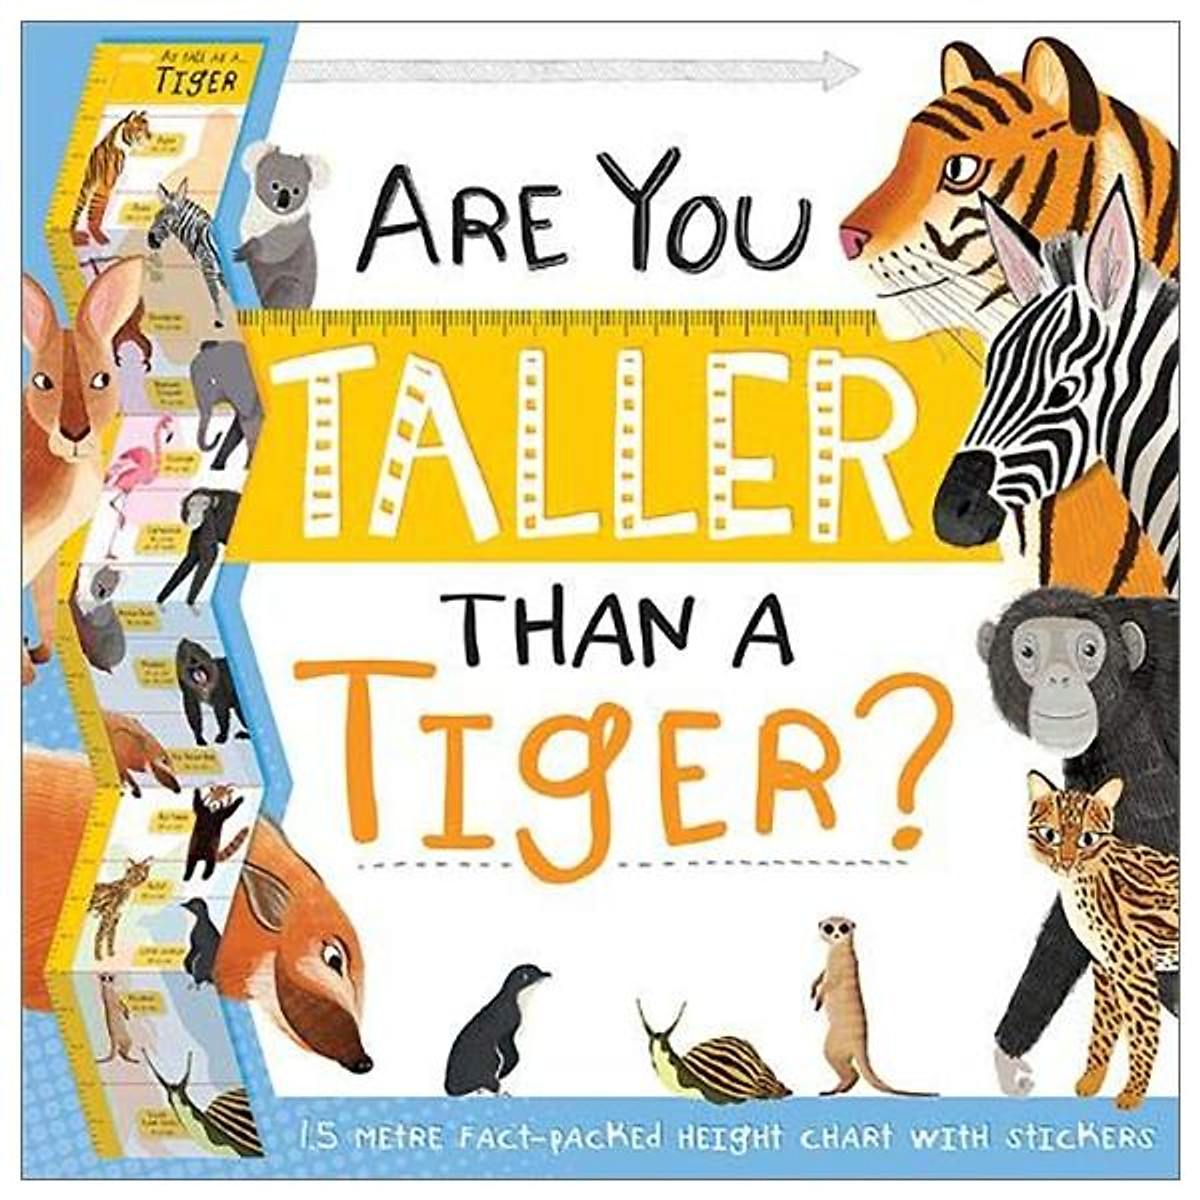 Are You Taller Than A Tiger? (Height Chart Fact Pack)